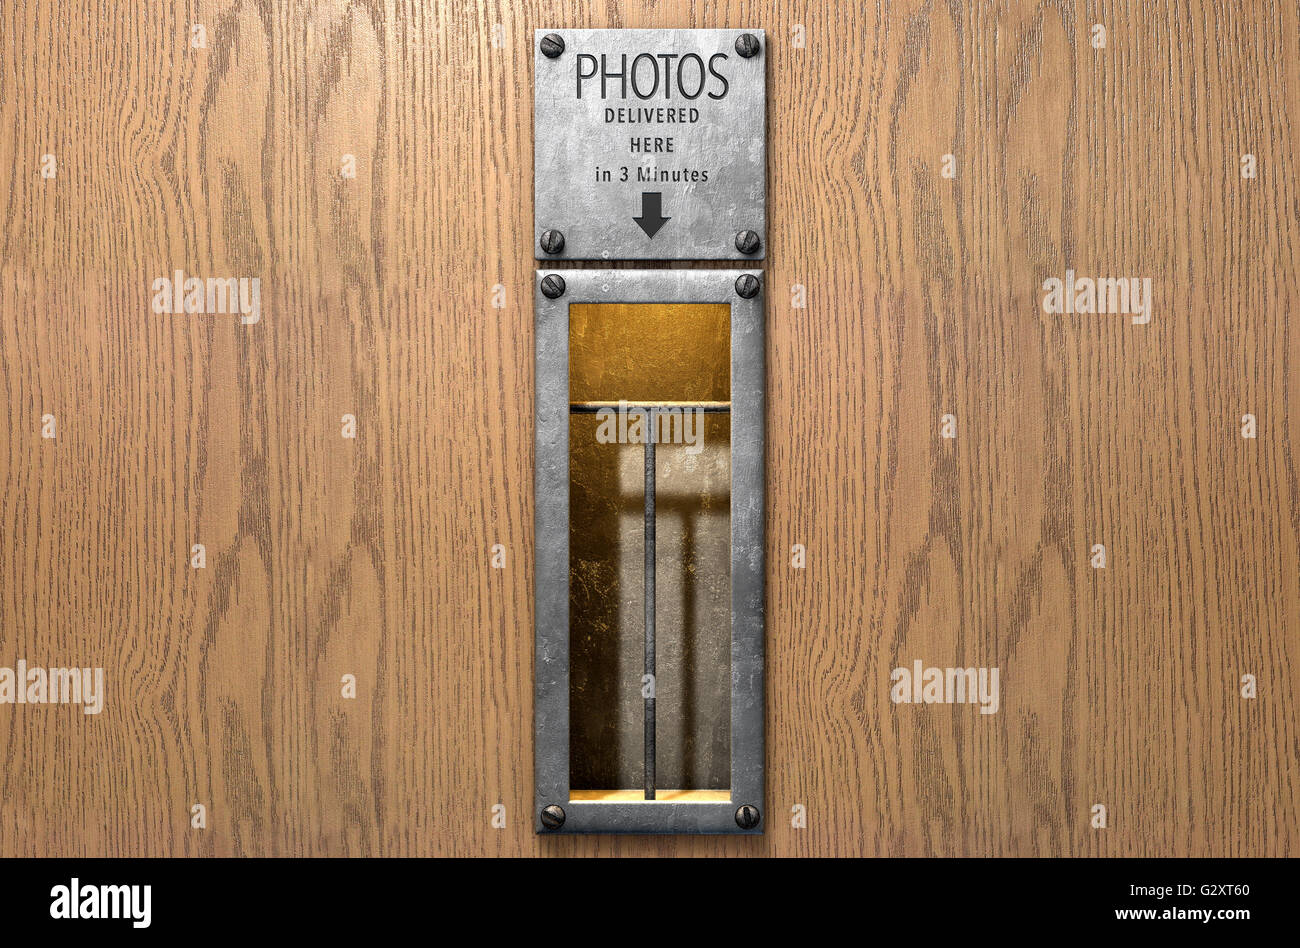 A 3D render of an empty illuminated vintage photo booths retrieval slot on a wood finished surface Stock Photo